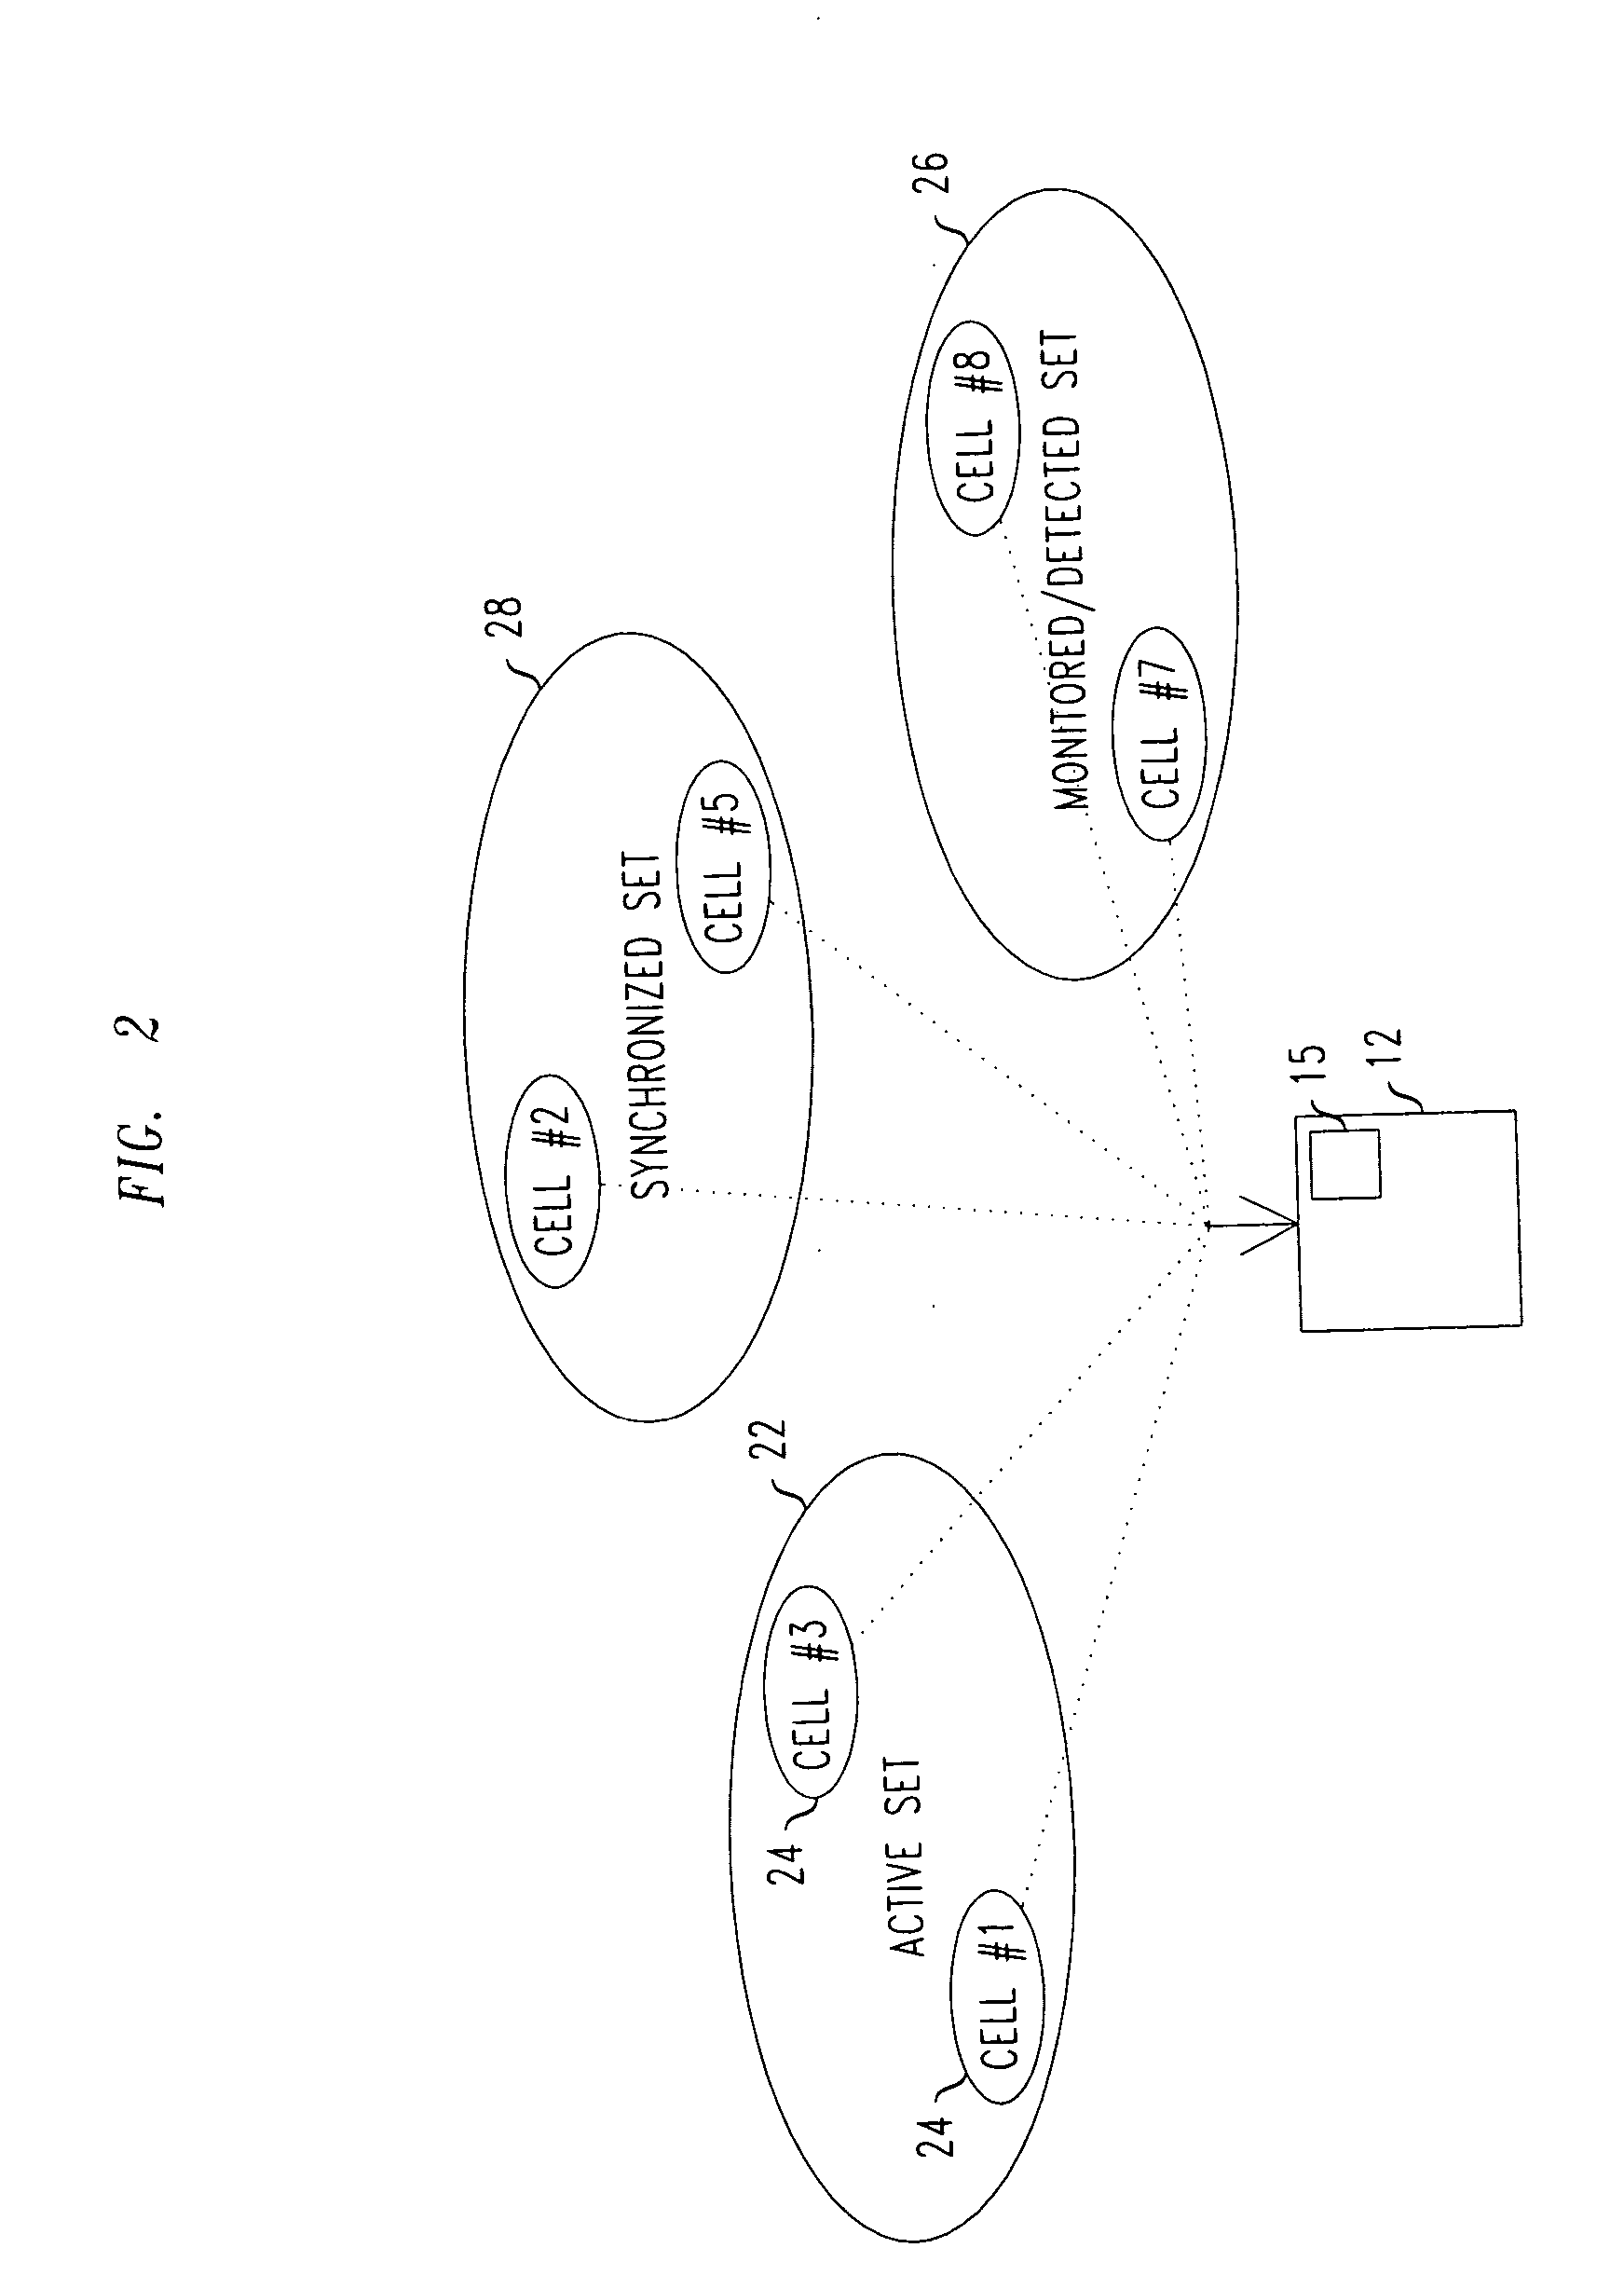 Radio telecommunications network, and a method of selecting base station antennas for connection with a mobile user terminal